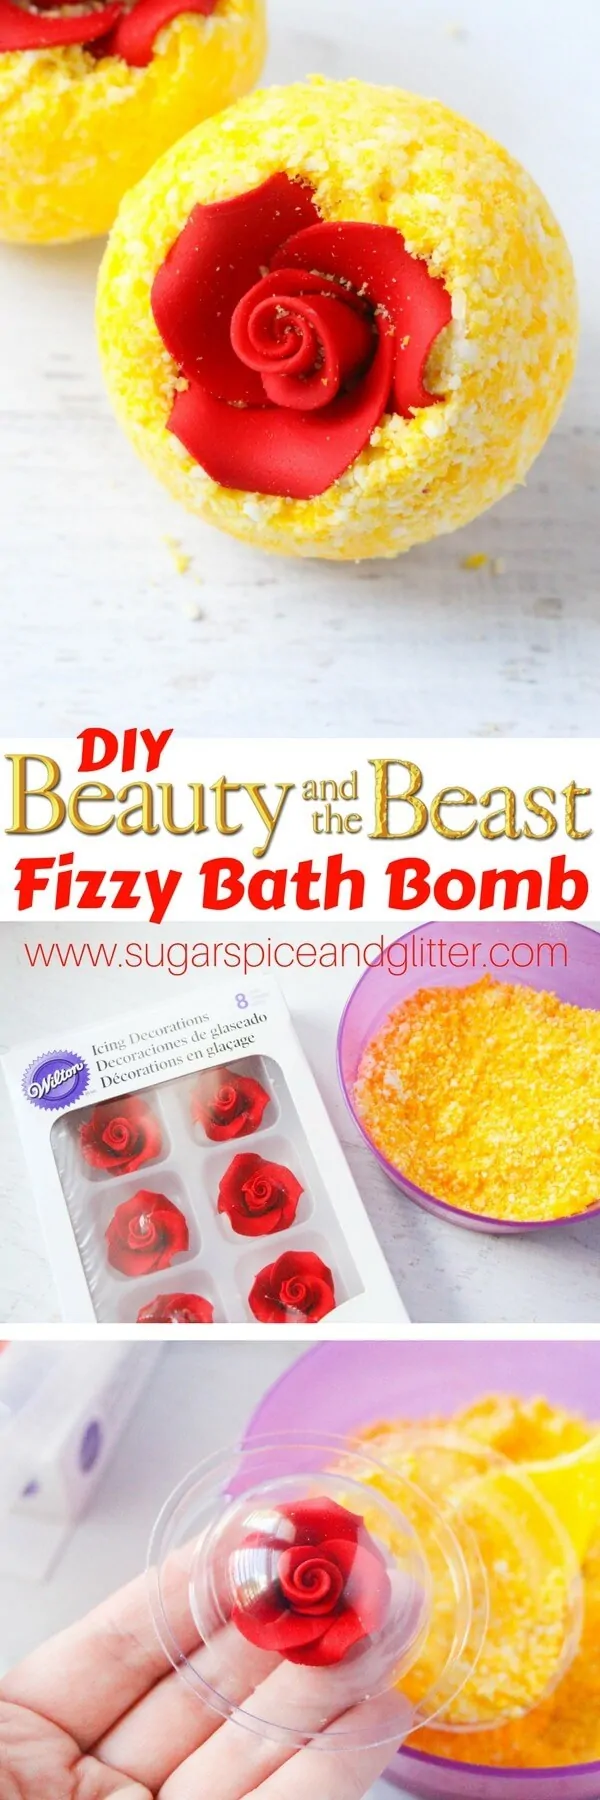 DIY Belle’s Bath Bombs - a fun Disney DIY gift or addition to your Disney movie night. The perfect Beauty & the Beast craft for your bathroom